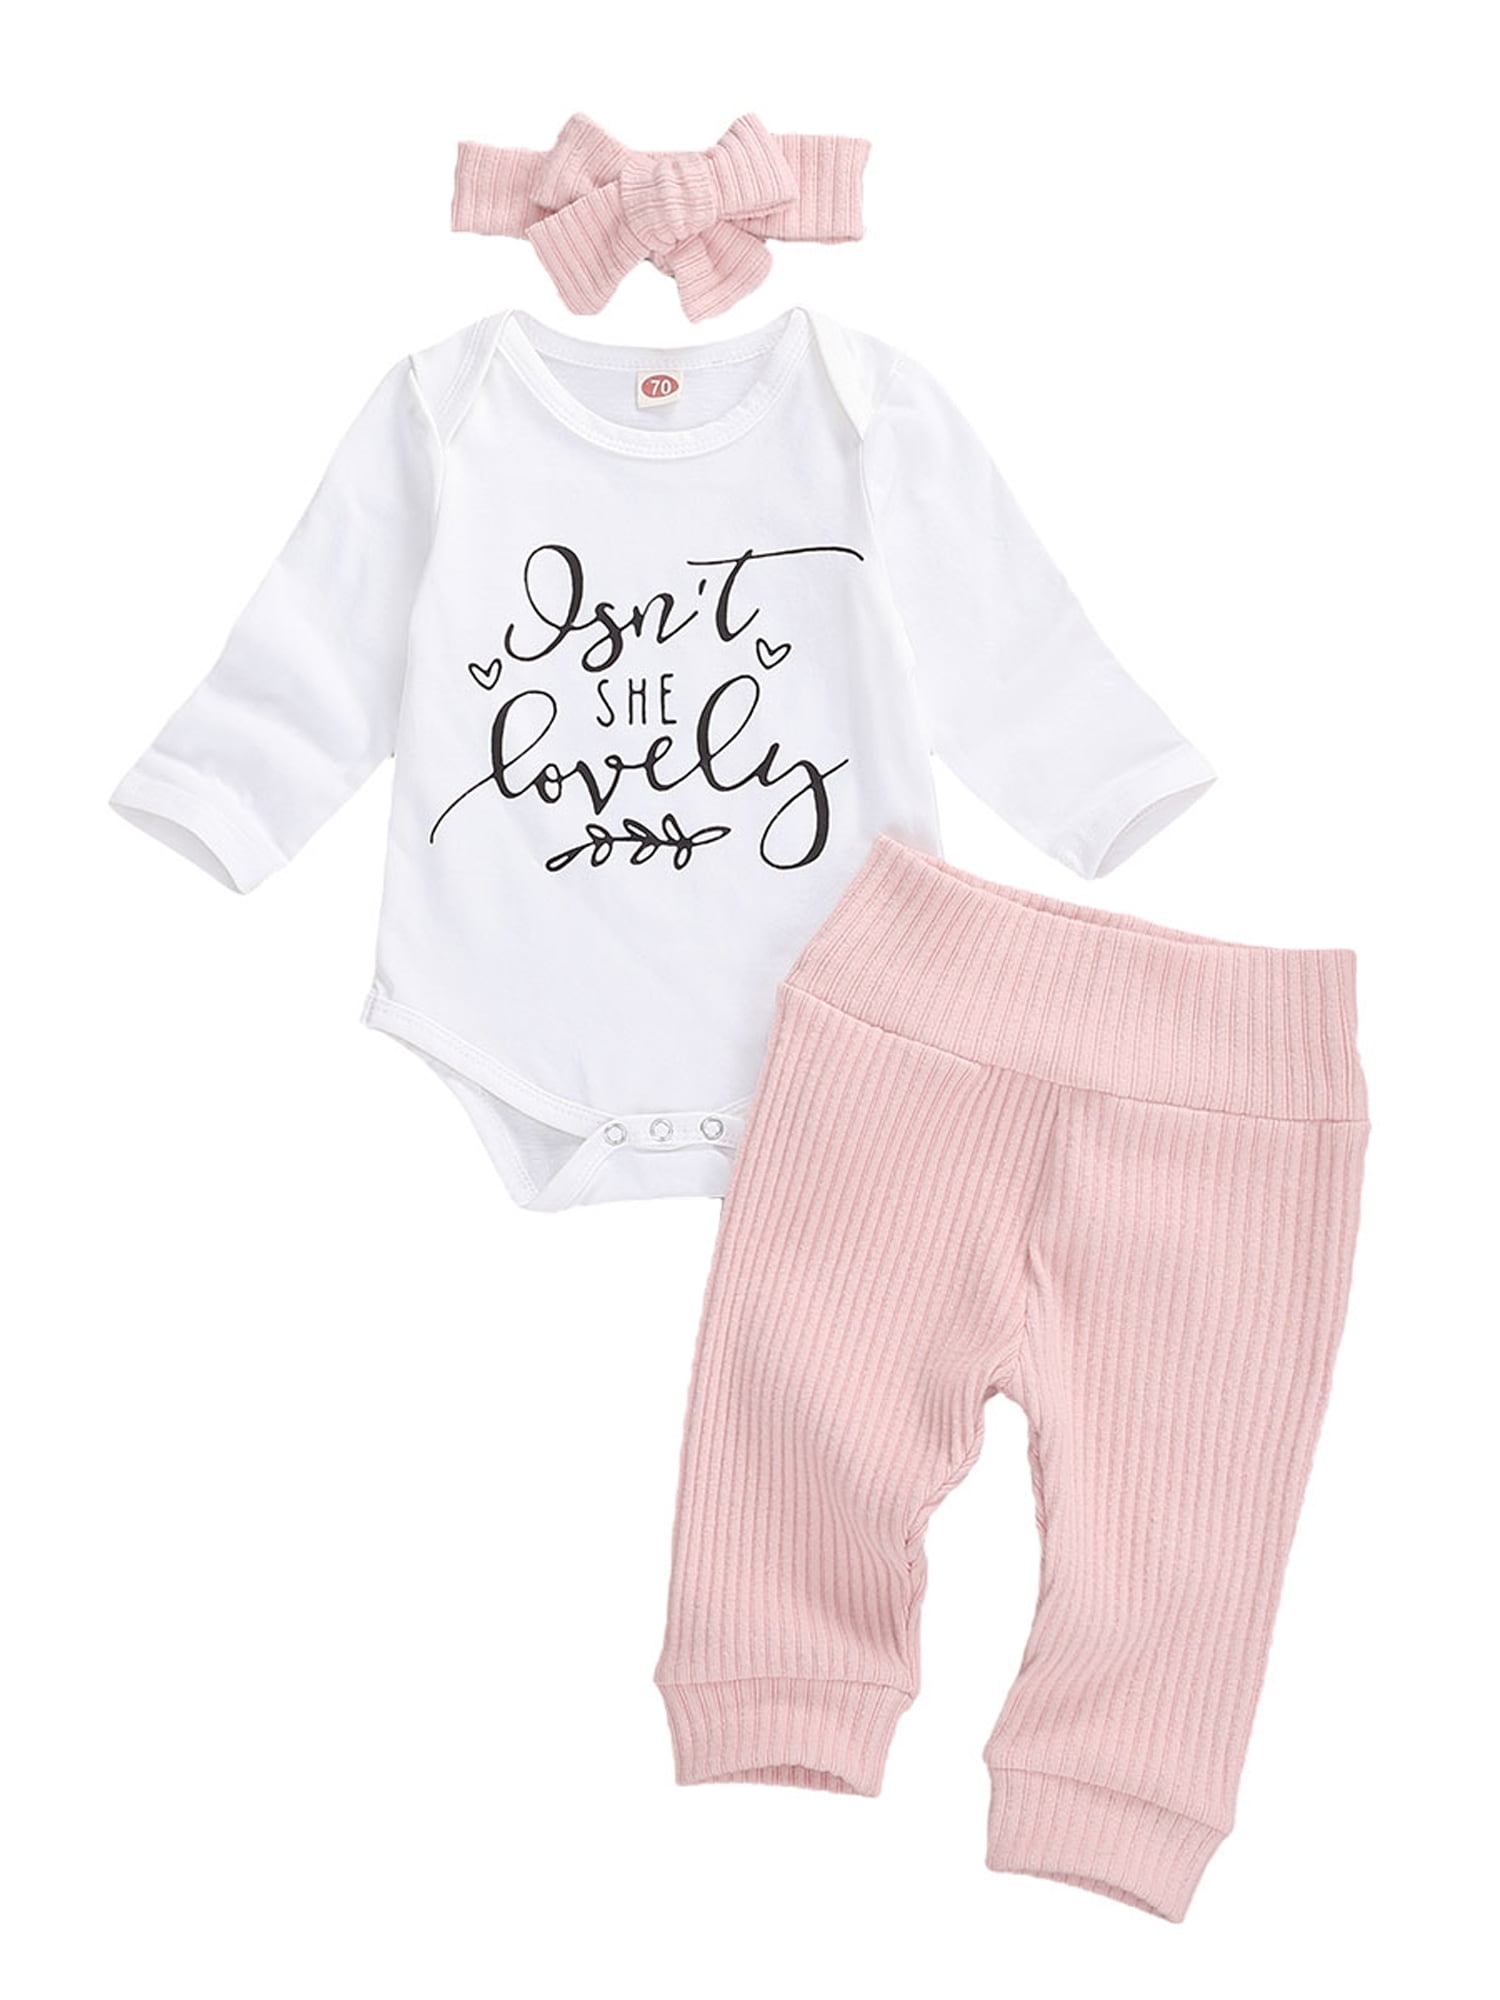 Details about   Infant Newborn Baby Girl Romper Jumpsuit Tops Pants Headband Outfits Clothes Set 